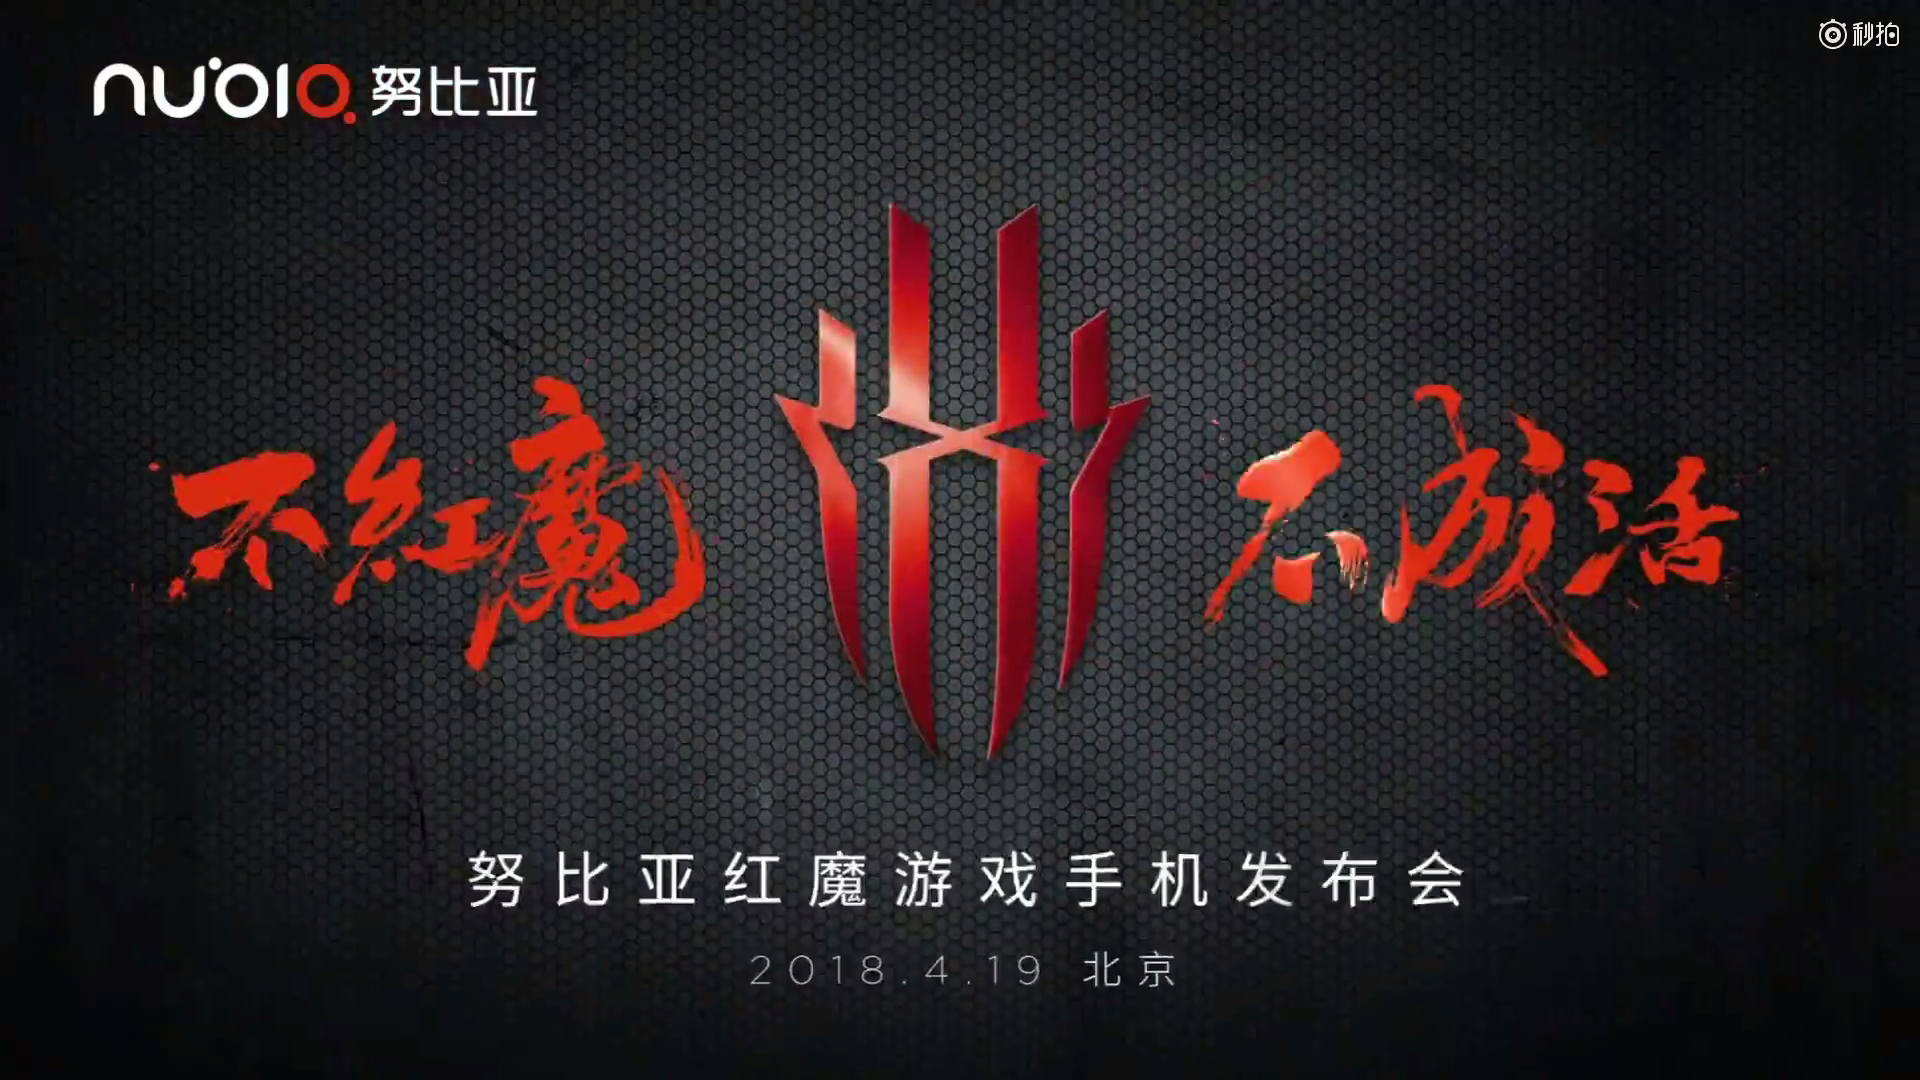 Teaser hints Nubia Red Magic gaming smartphone launch on April 19 1